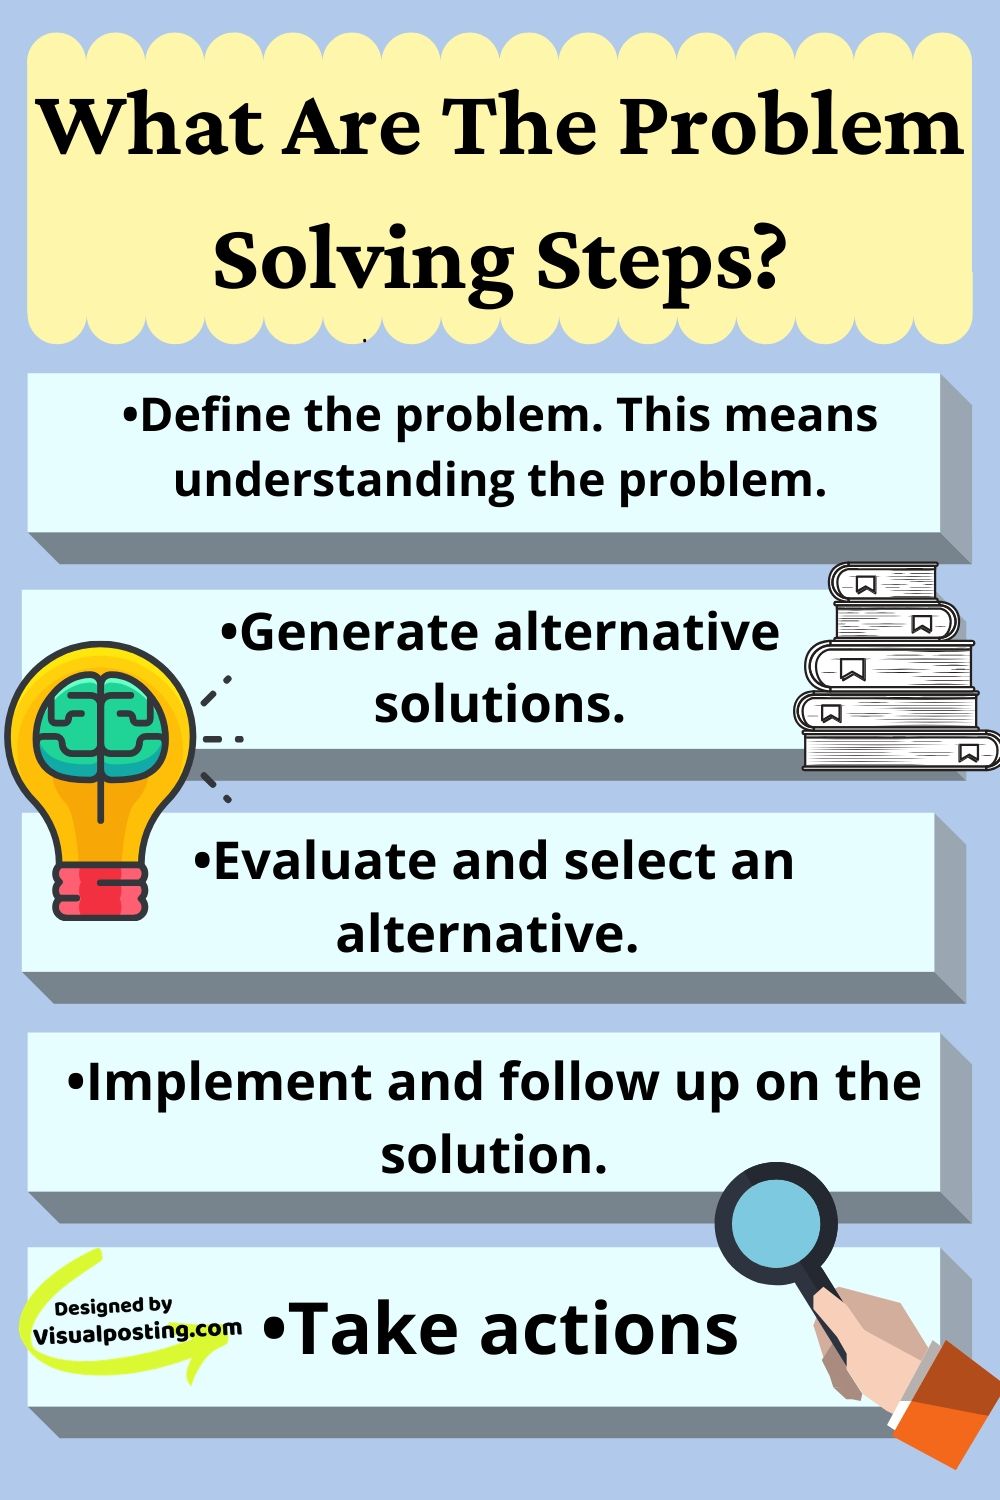 learning about problem solving refers to learning different strategies